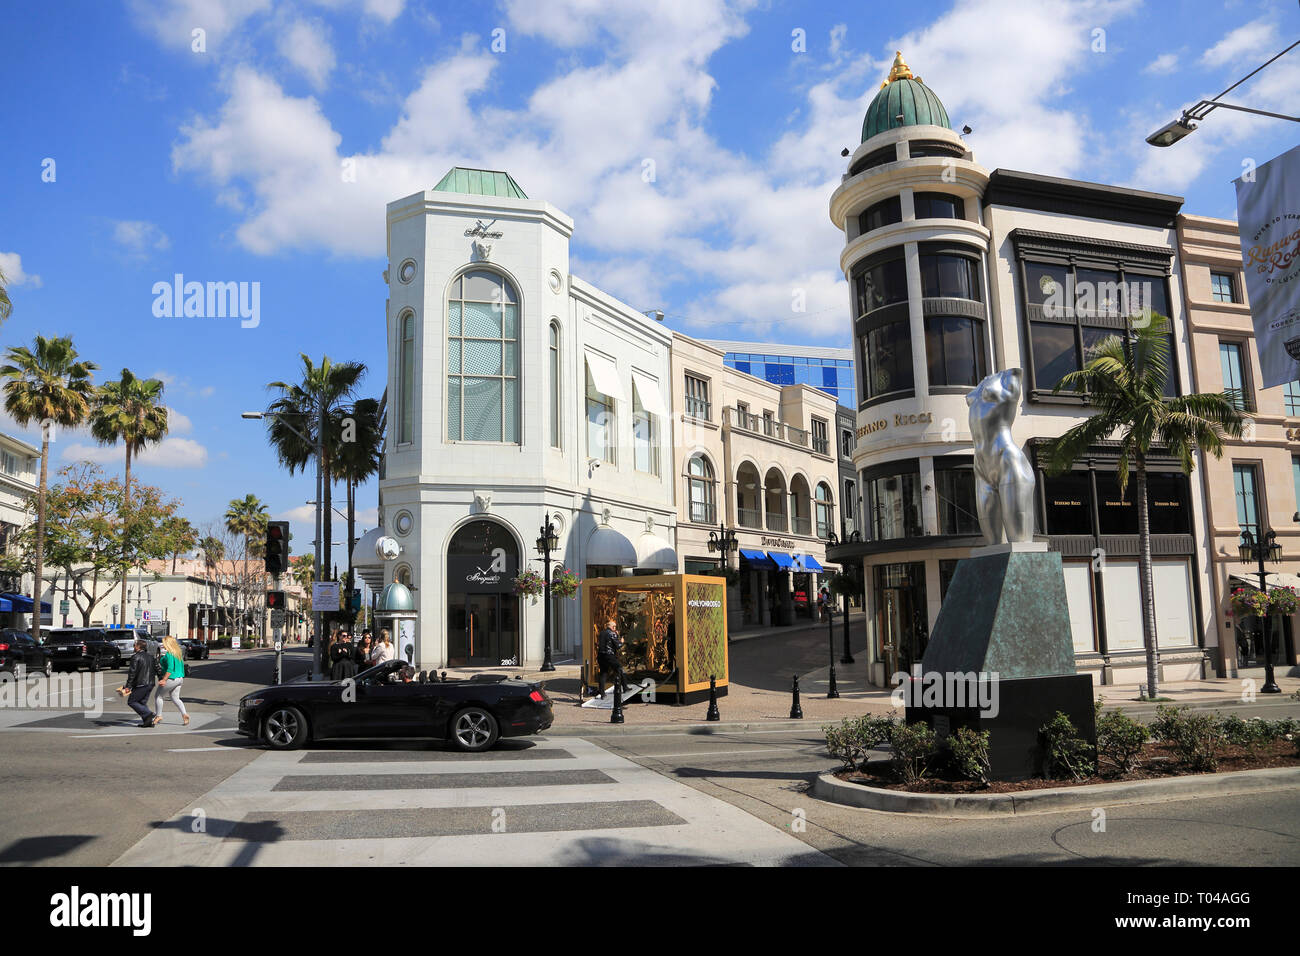 World famous Rodeo Drive symbol, Cross Street Sign, Intersection in Beverly  Hills. Touristic Los Angeles, California, USA. Rich wealthy life  consumerism, Luxury brands and high-class stores concept. Stock Photo